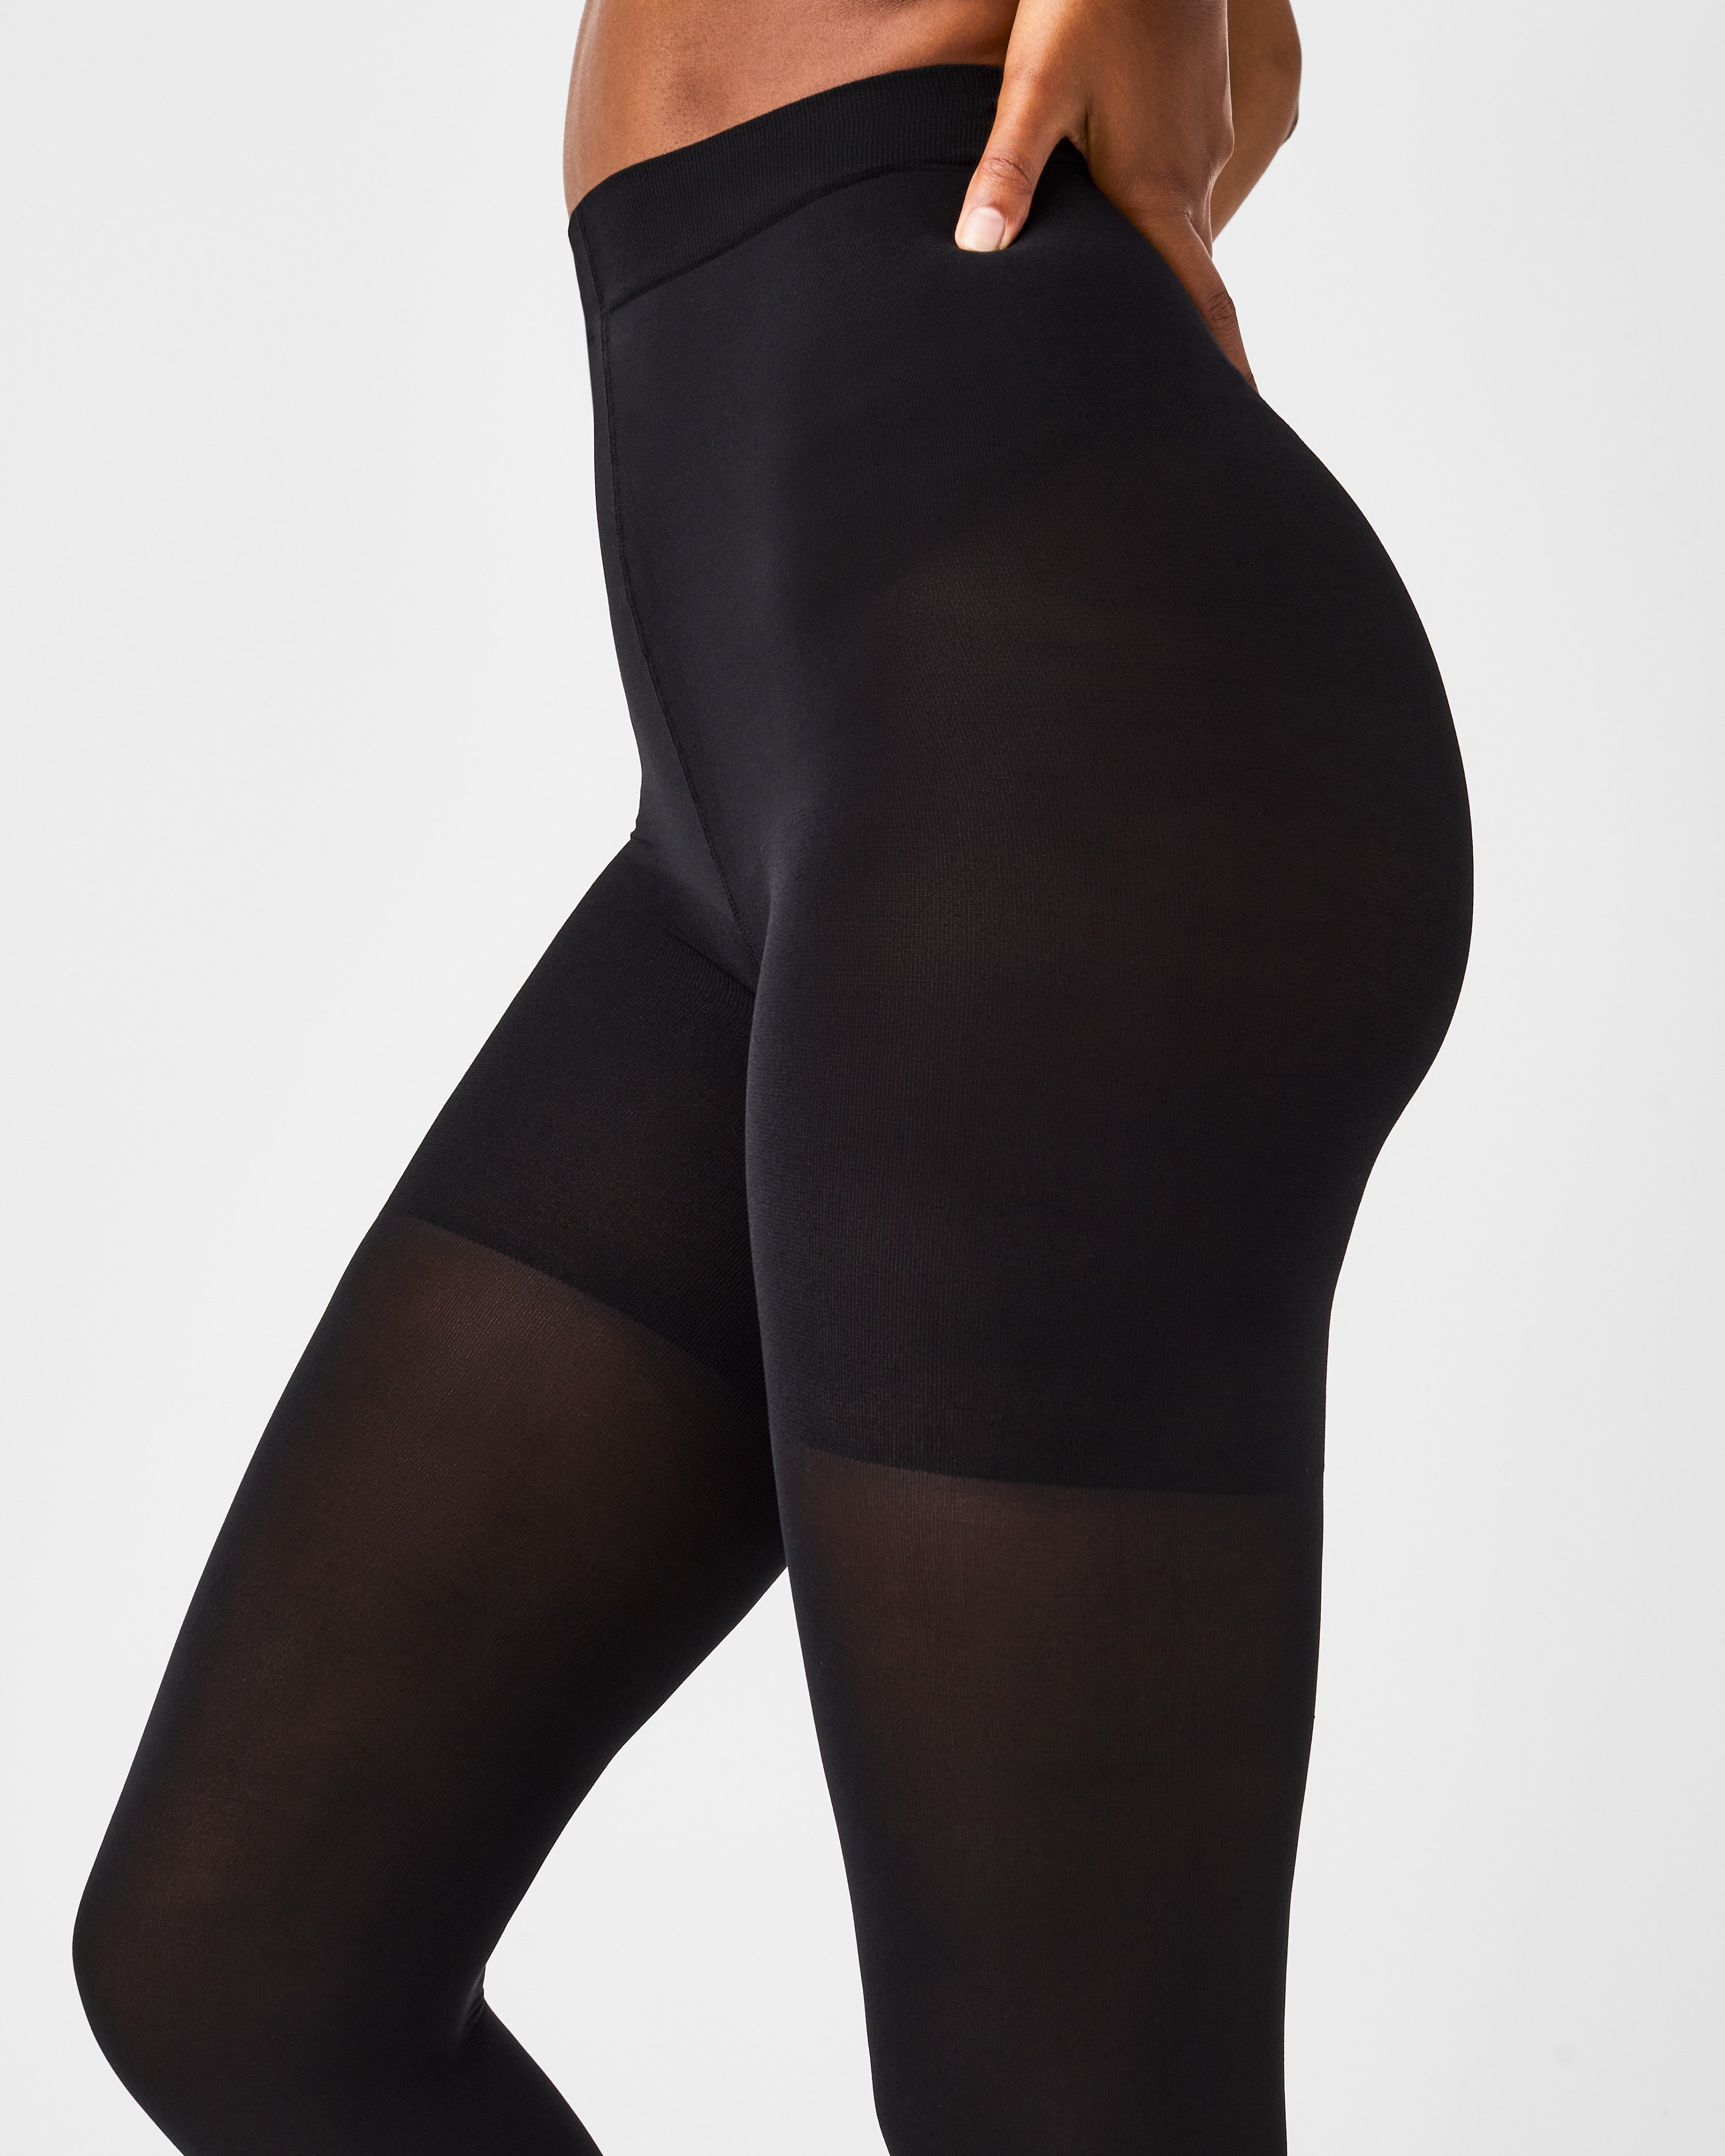 SPANX, Accessories, New Spanx Tight End Tights Black Size A Shapewear  High Rise Opaque Hoisery Shape